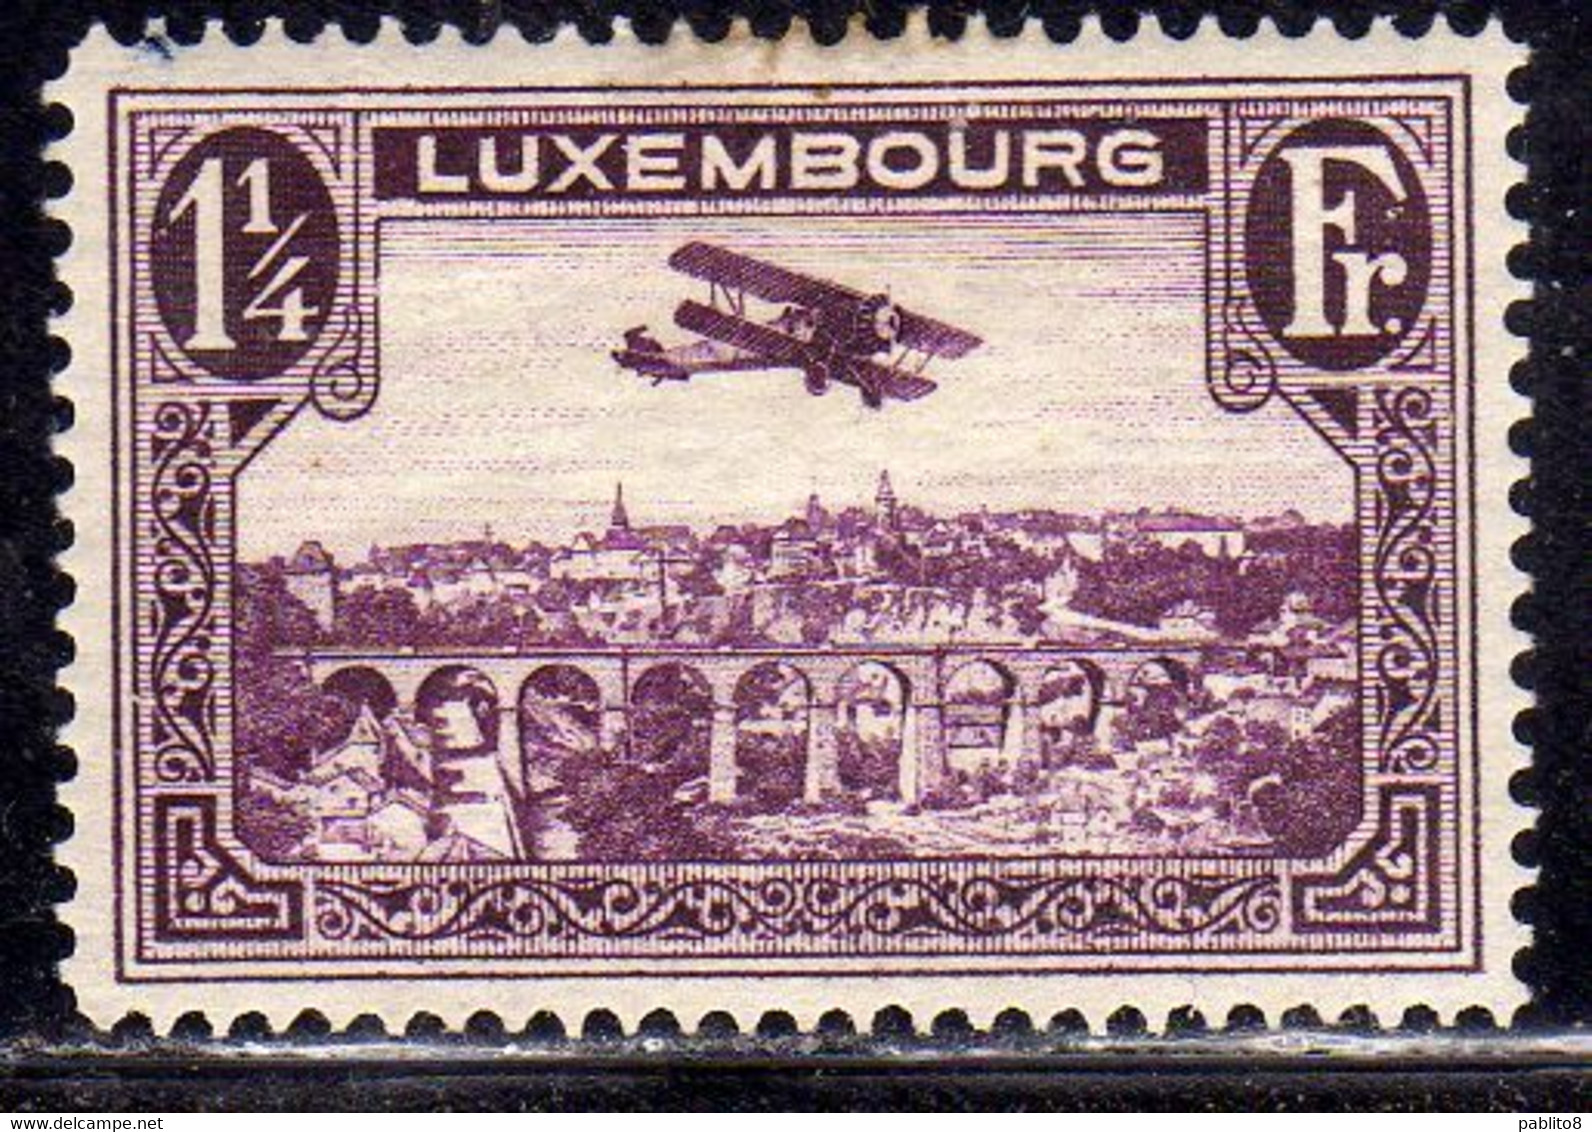 LUXEMBOURG LUSSEMBURGO 1931 1933 AIR POST STAMPS AIRMAIL AIRPLANE OVER POSTA AEREA 1 1/4fr MLH - Nuovi